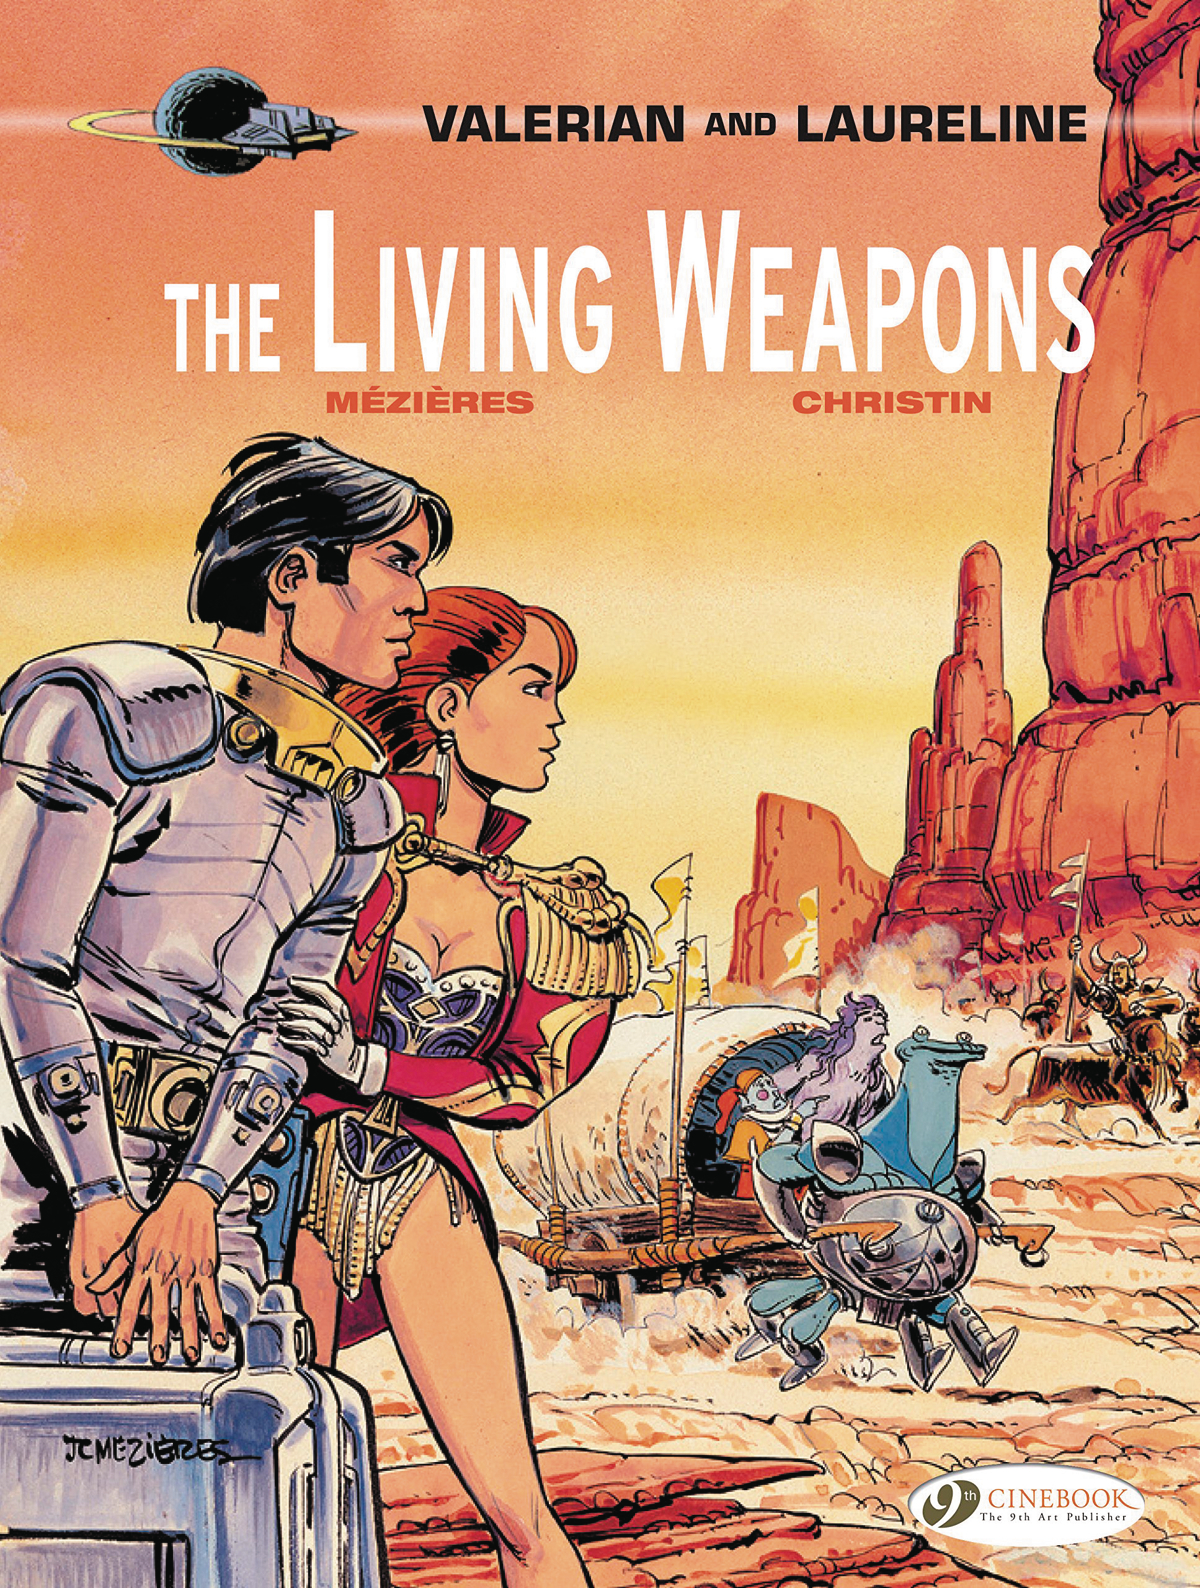 VALERIAN GN VOL 14 LIVING WEAPONS